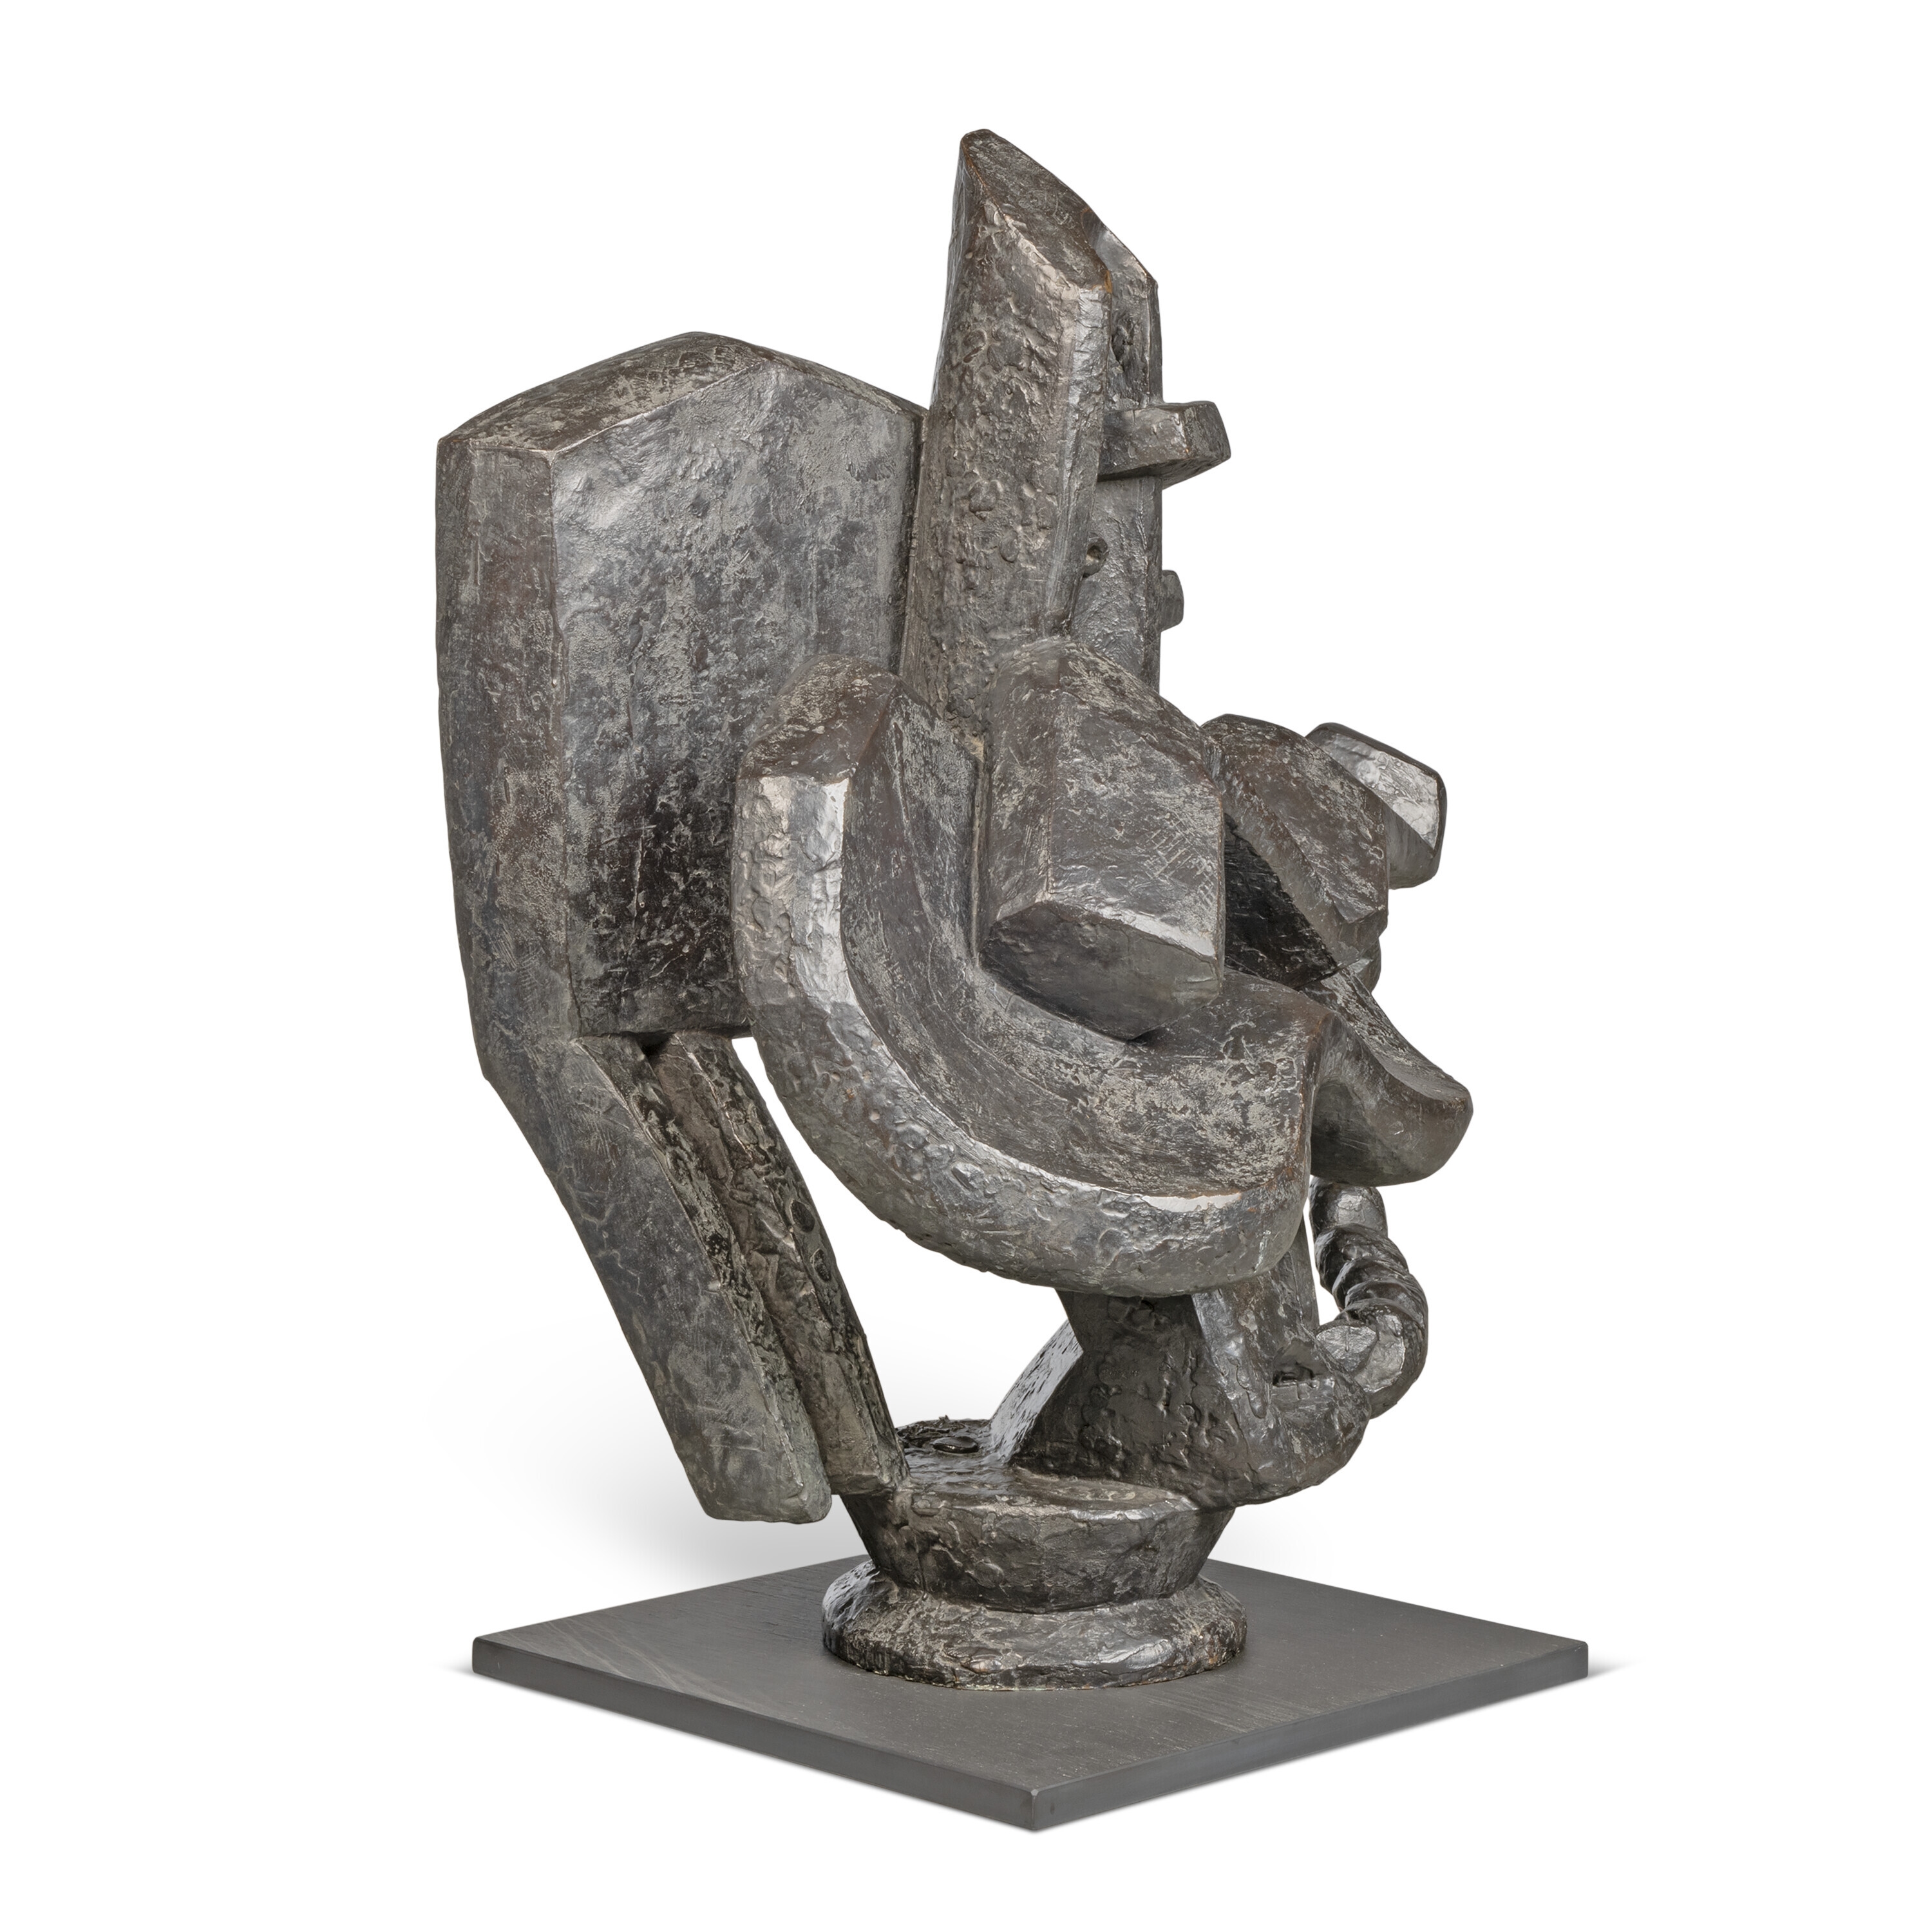 Artwork by Jacques Lipchitz, Musical Instruments, Made of bronze with dark brown patina